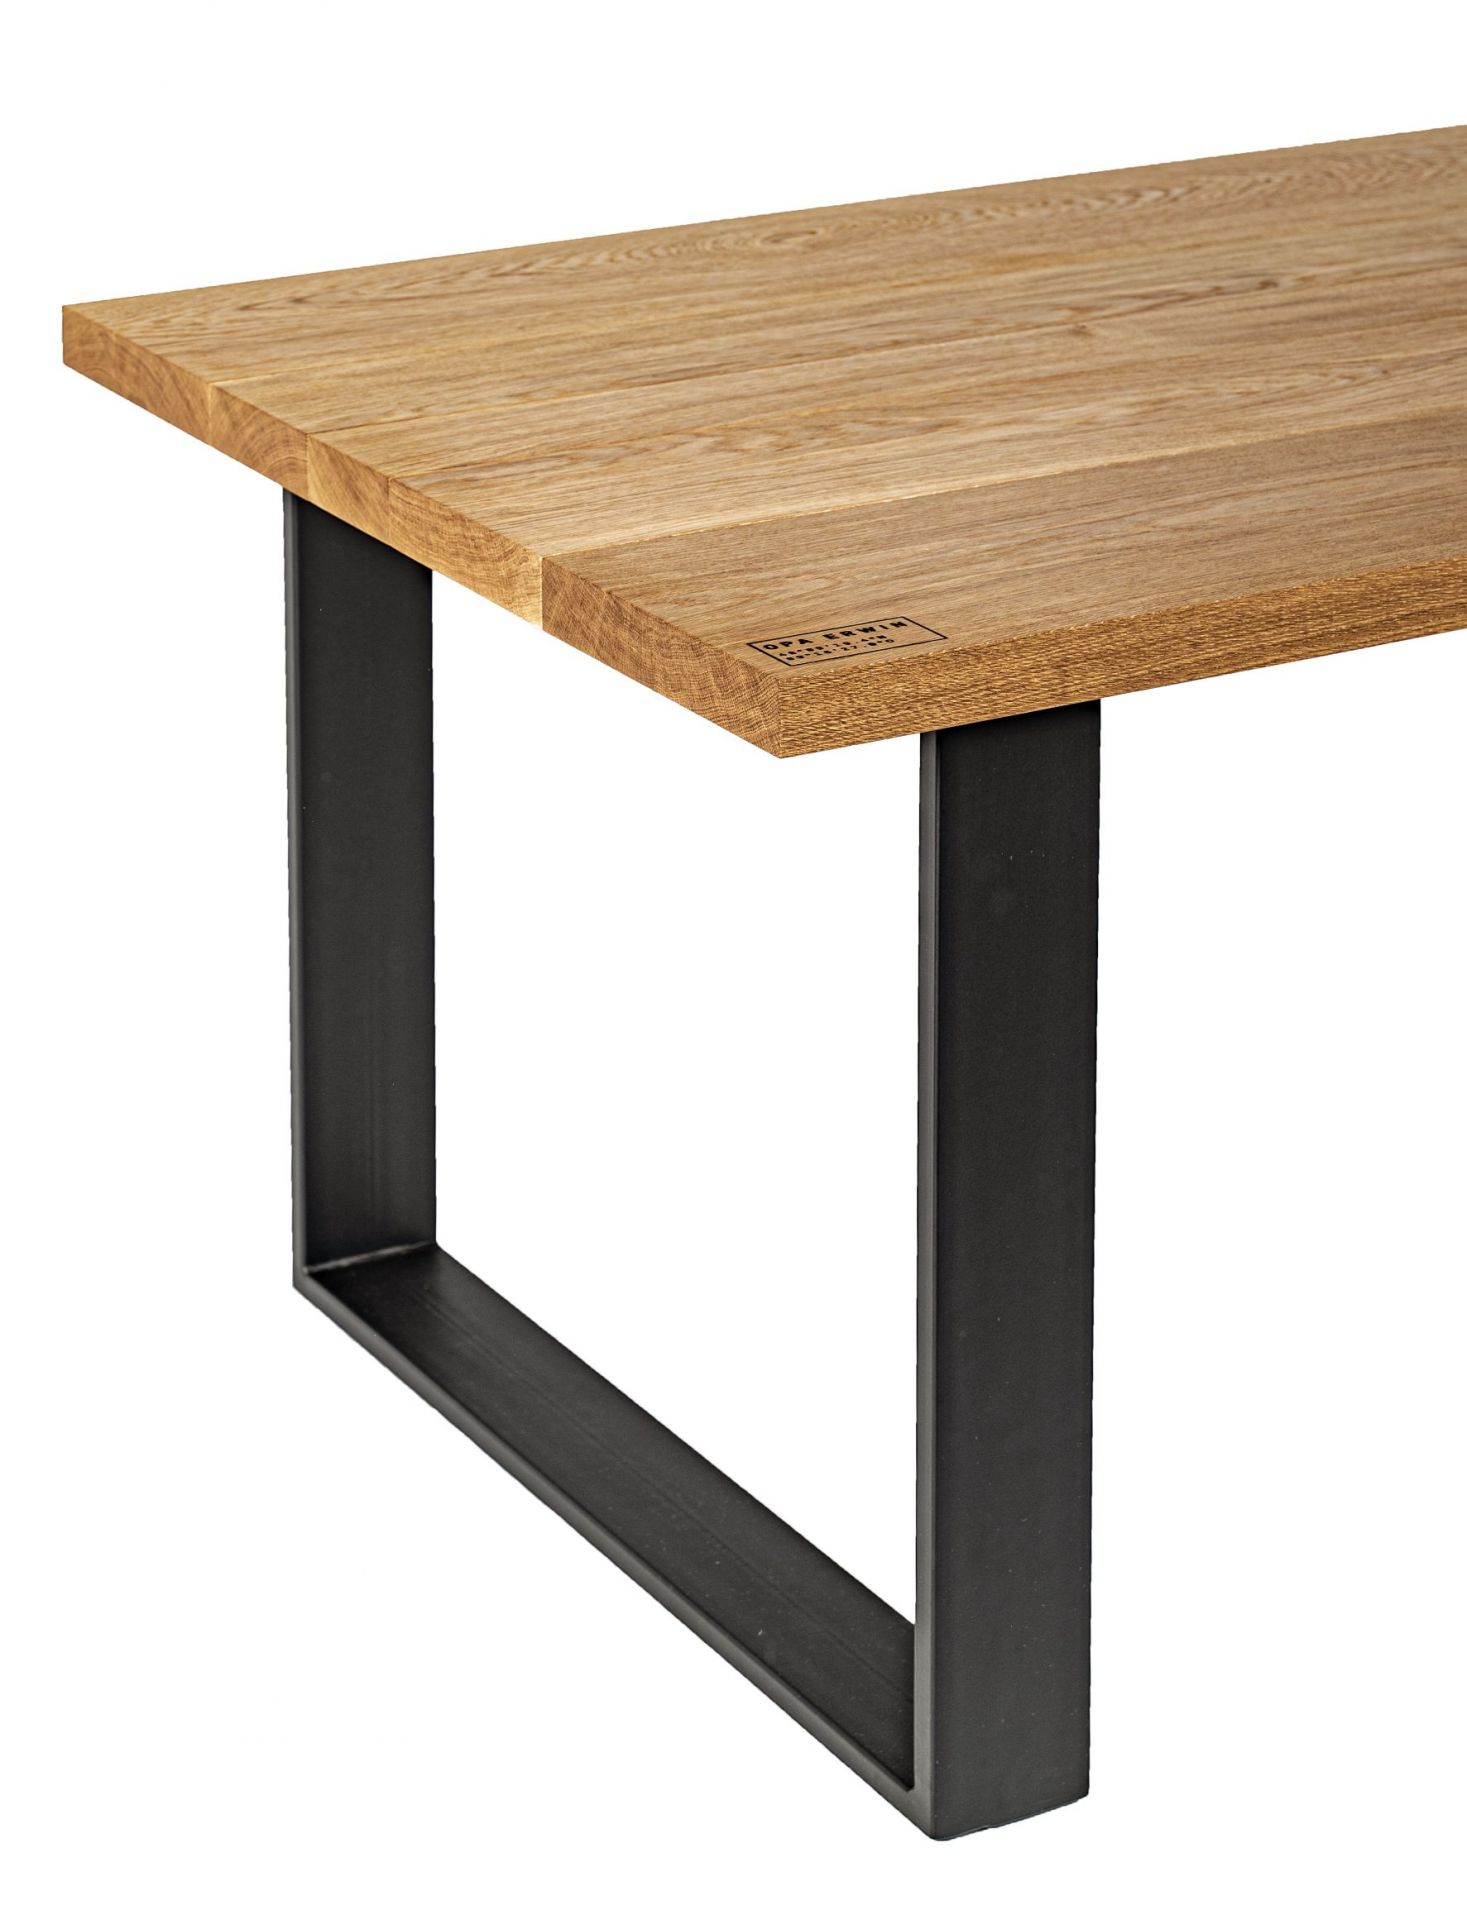  No. 1 Dining table Opa Erwin